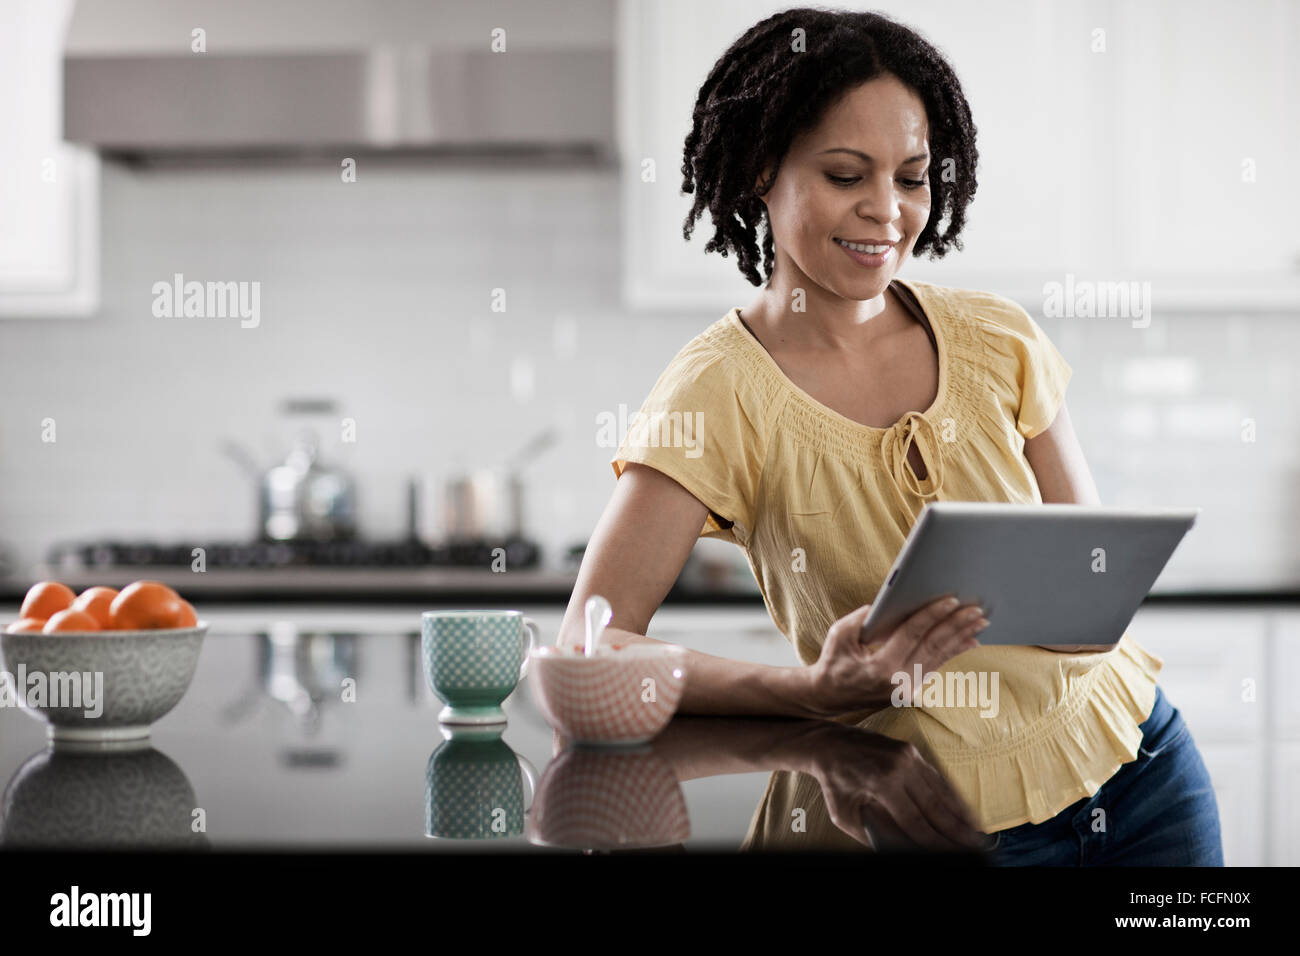 A woman using a digital tablet in her home. Standing in the kitchen. Stock Photo